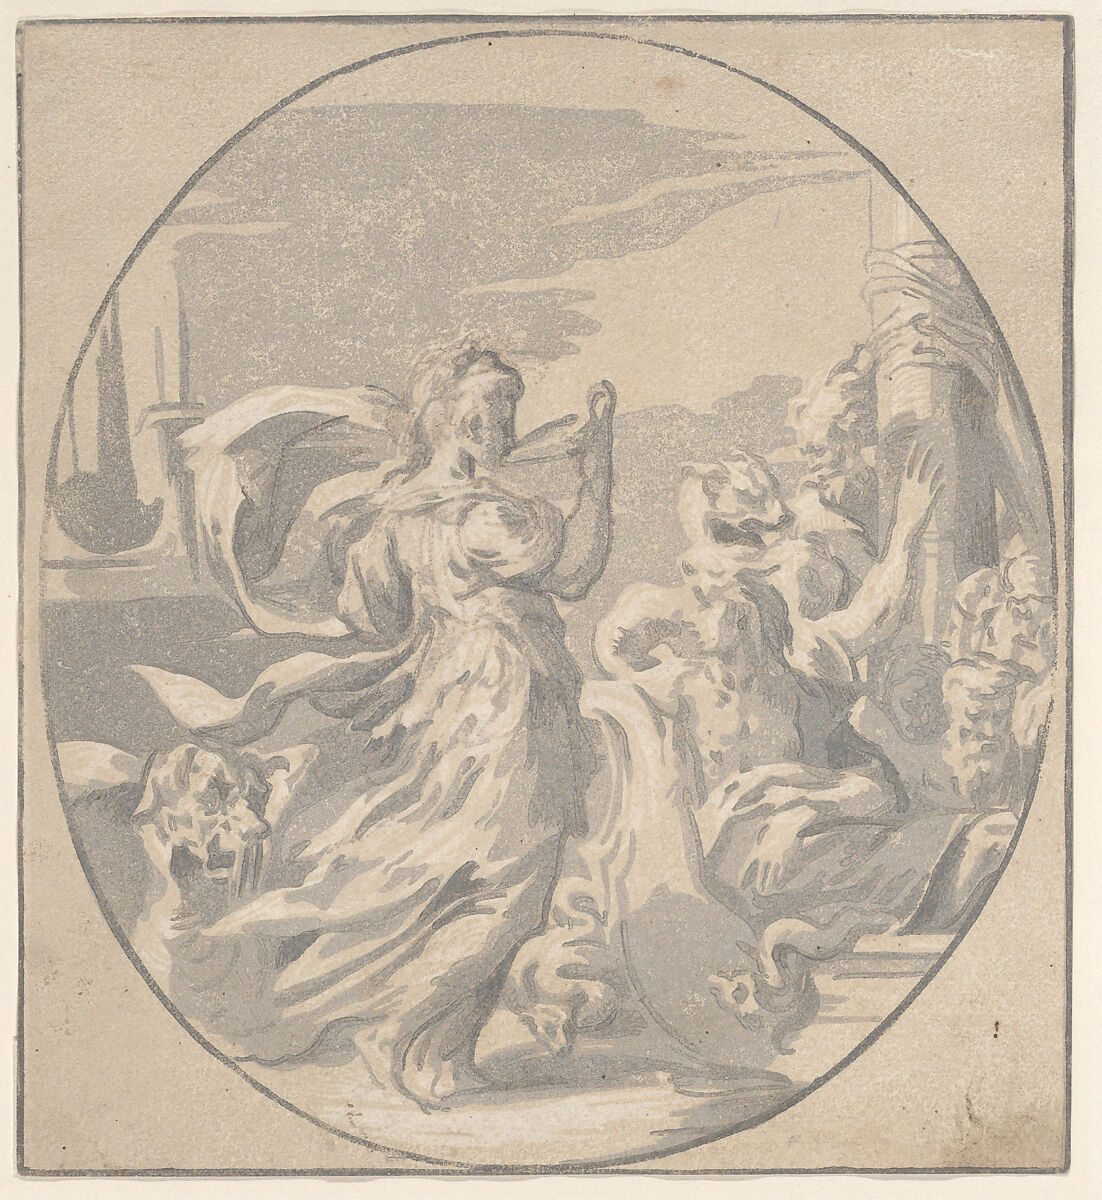 Circe drinking from a cup, an oval composition, Niccolò Vicentino (Italian, active ca. 1510–ca. 1550), Chiaroscuro woodcut from two blocks in gray, state one of two 